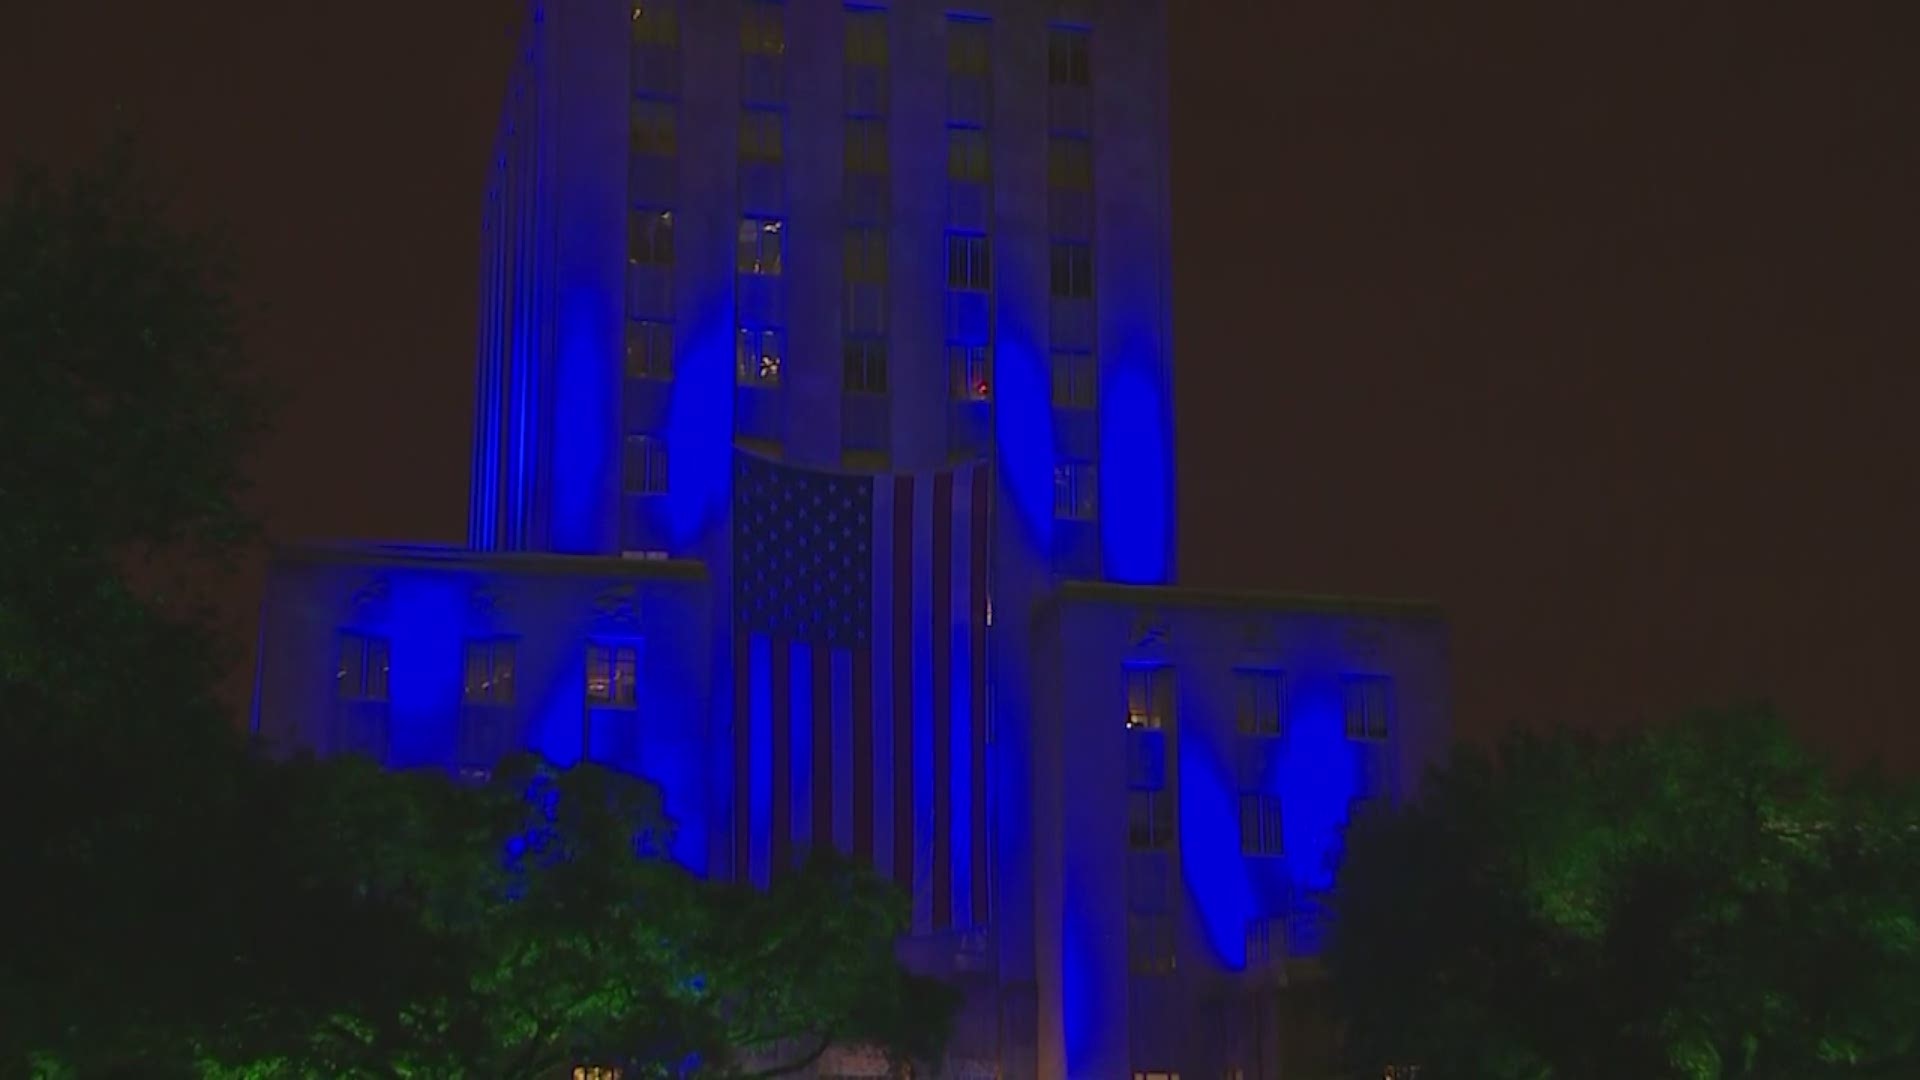 Houston's City Hall is lit up in blue in honor of the former First Lady Barbara Bush.